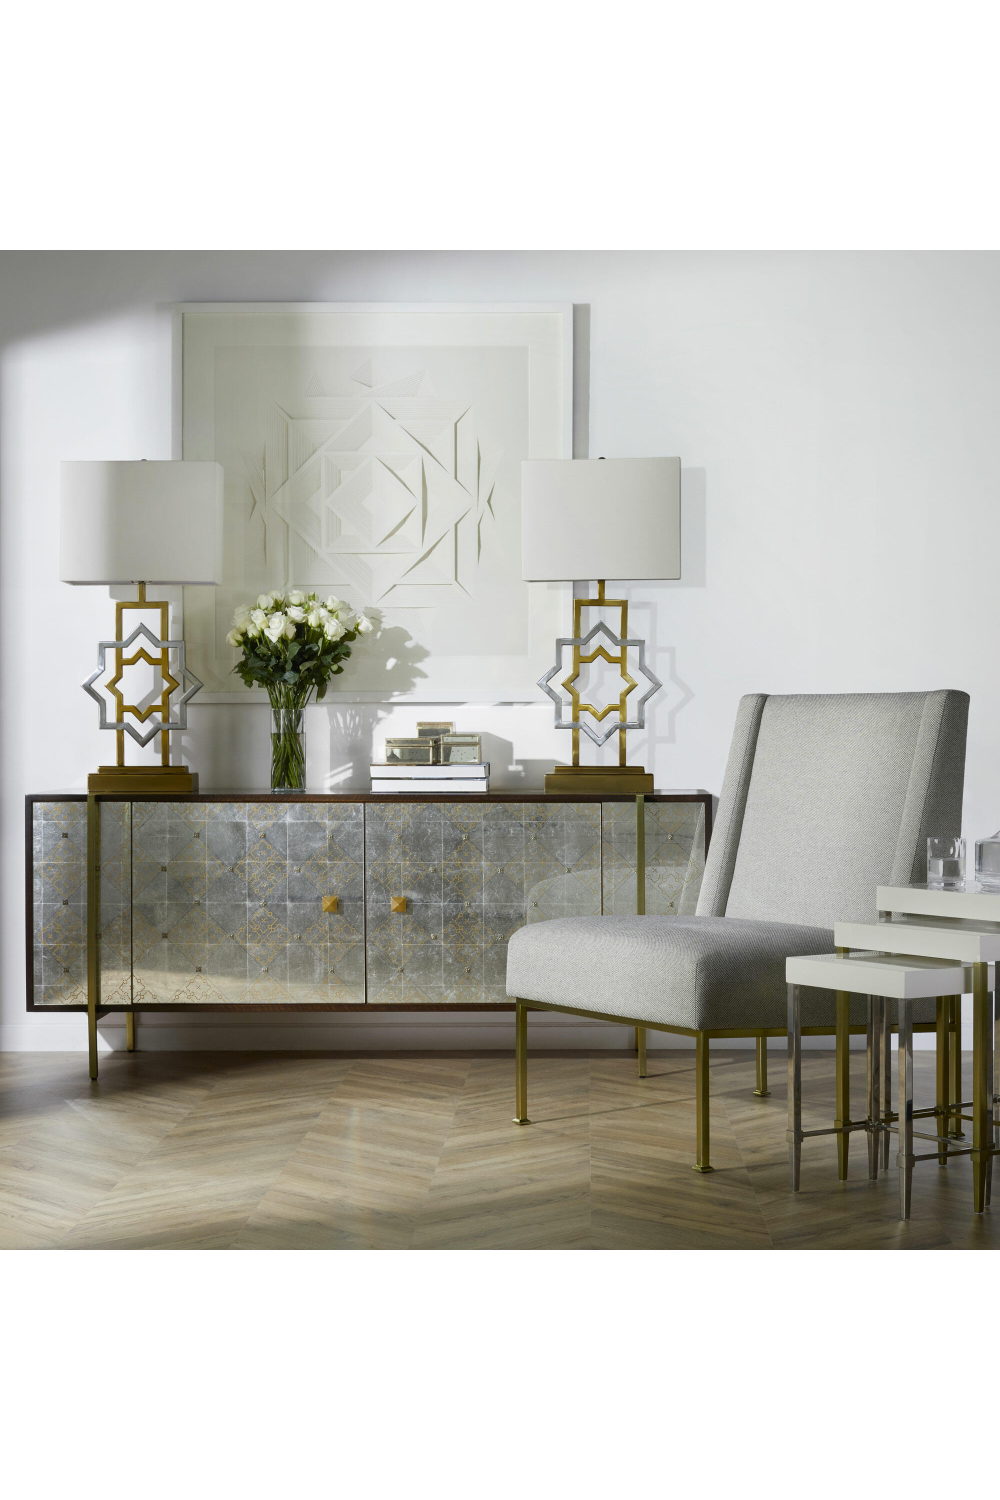 Eglomise Patterned Sideboard | Andrew Martin Adrian | Oroa.com